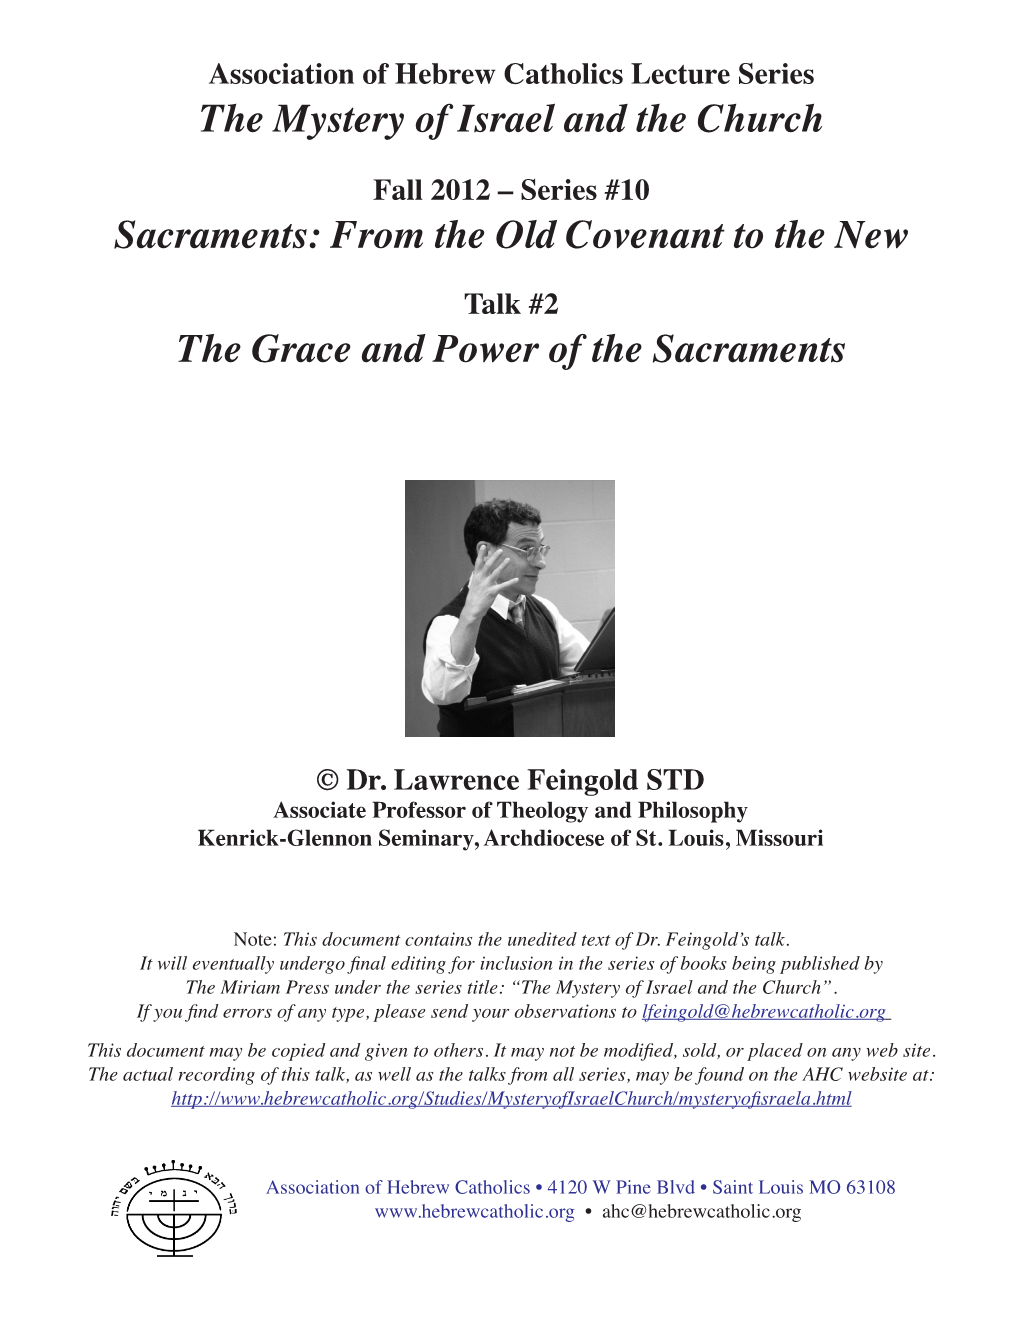 Sacraments: from the Old Covenant to the New the Grace and Power of the Sacraments the Mystery of Israel and the Church